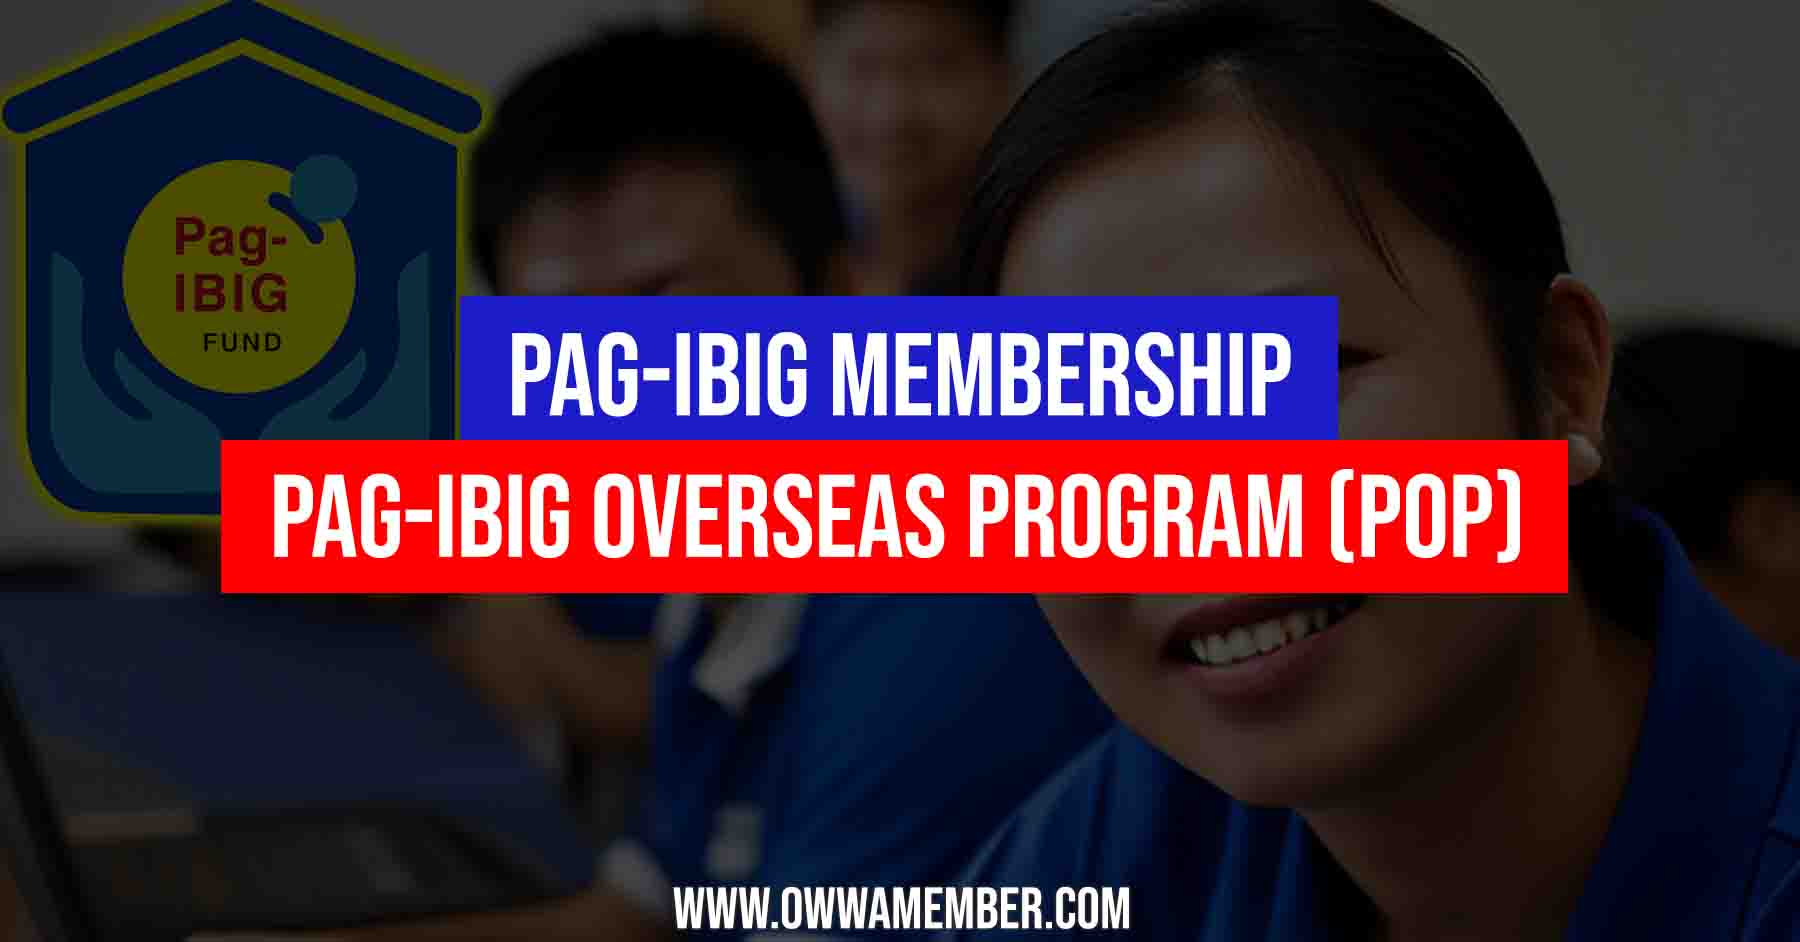 pagibig membership featured image for owwamember copy